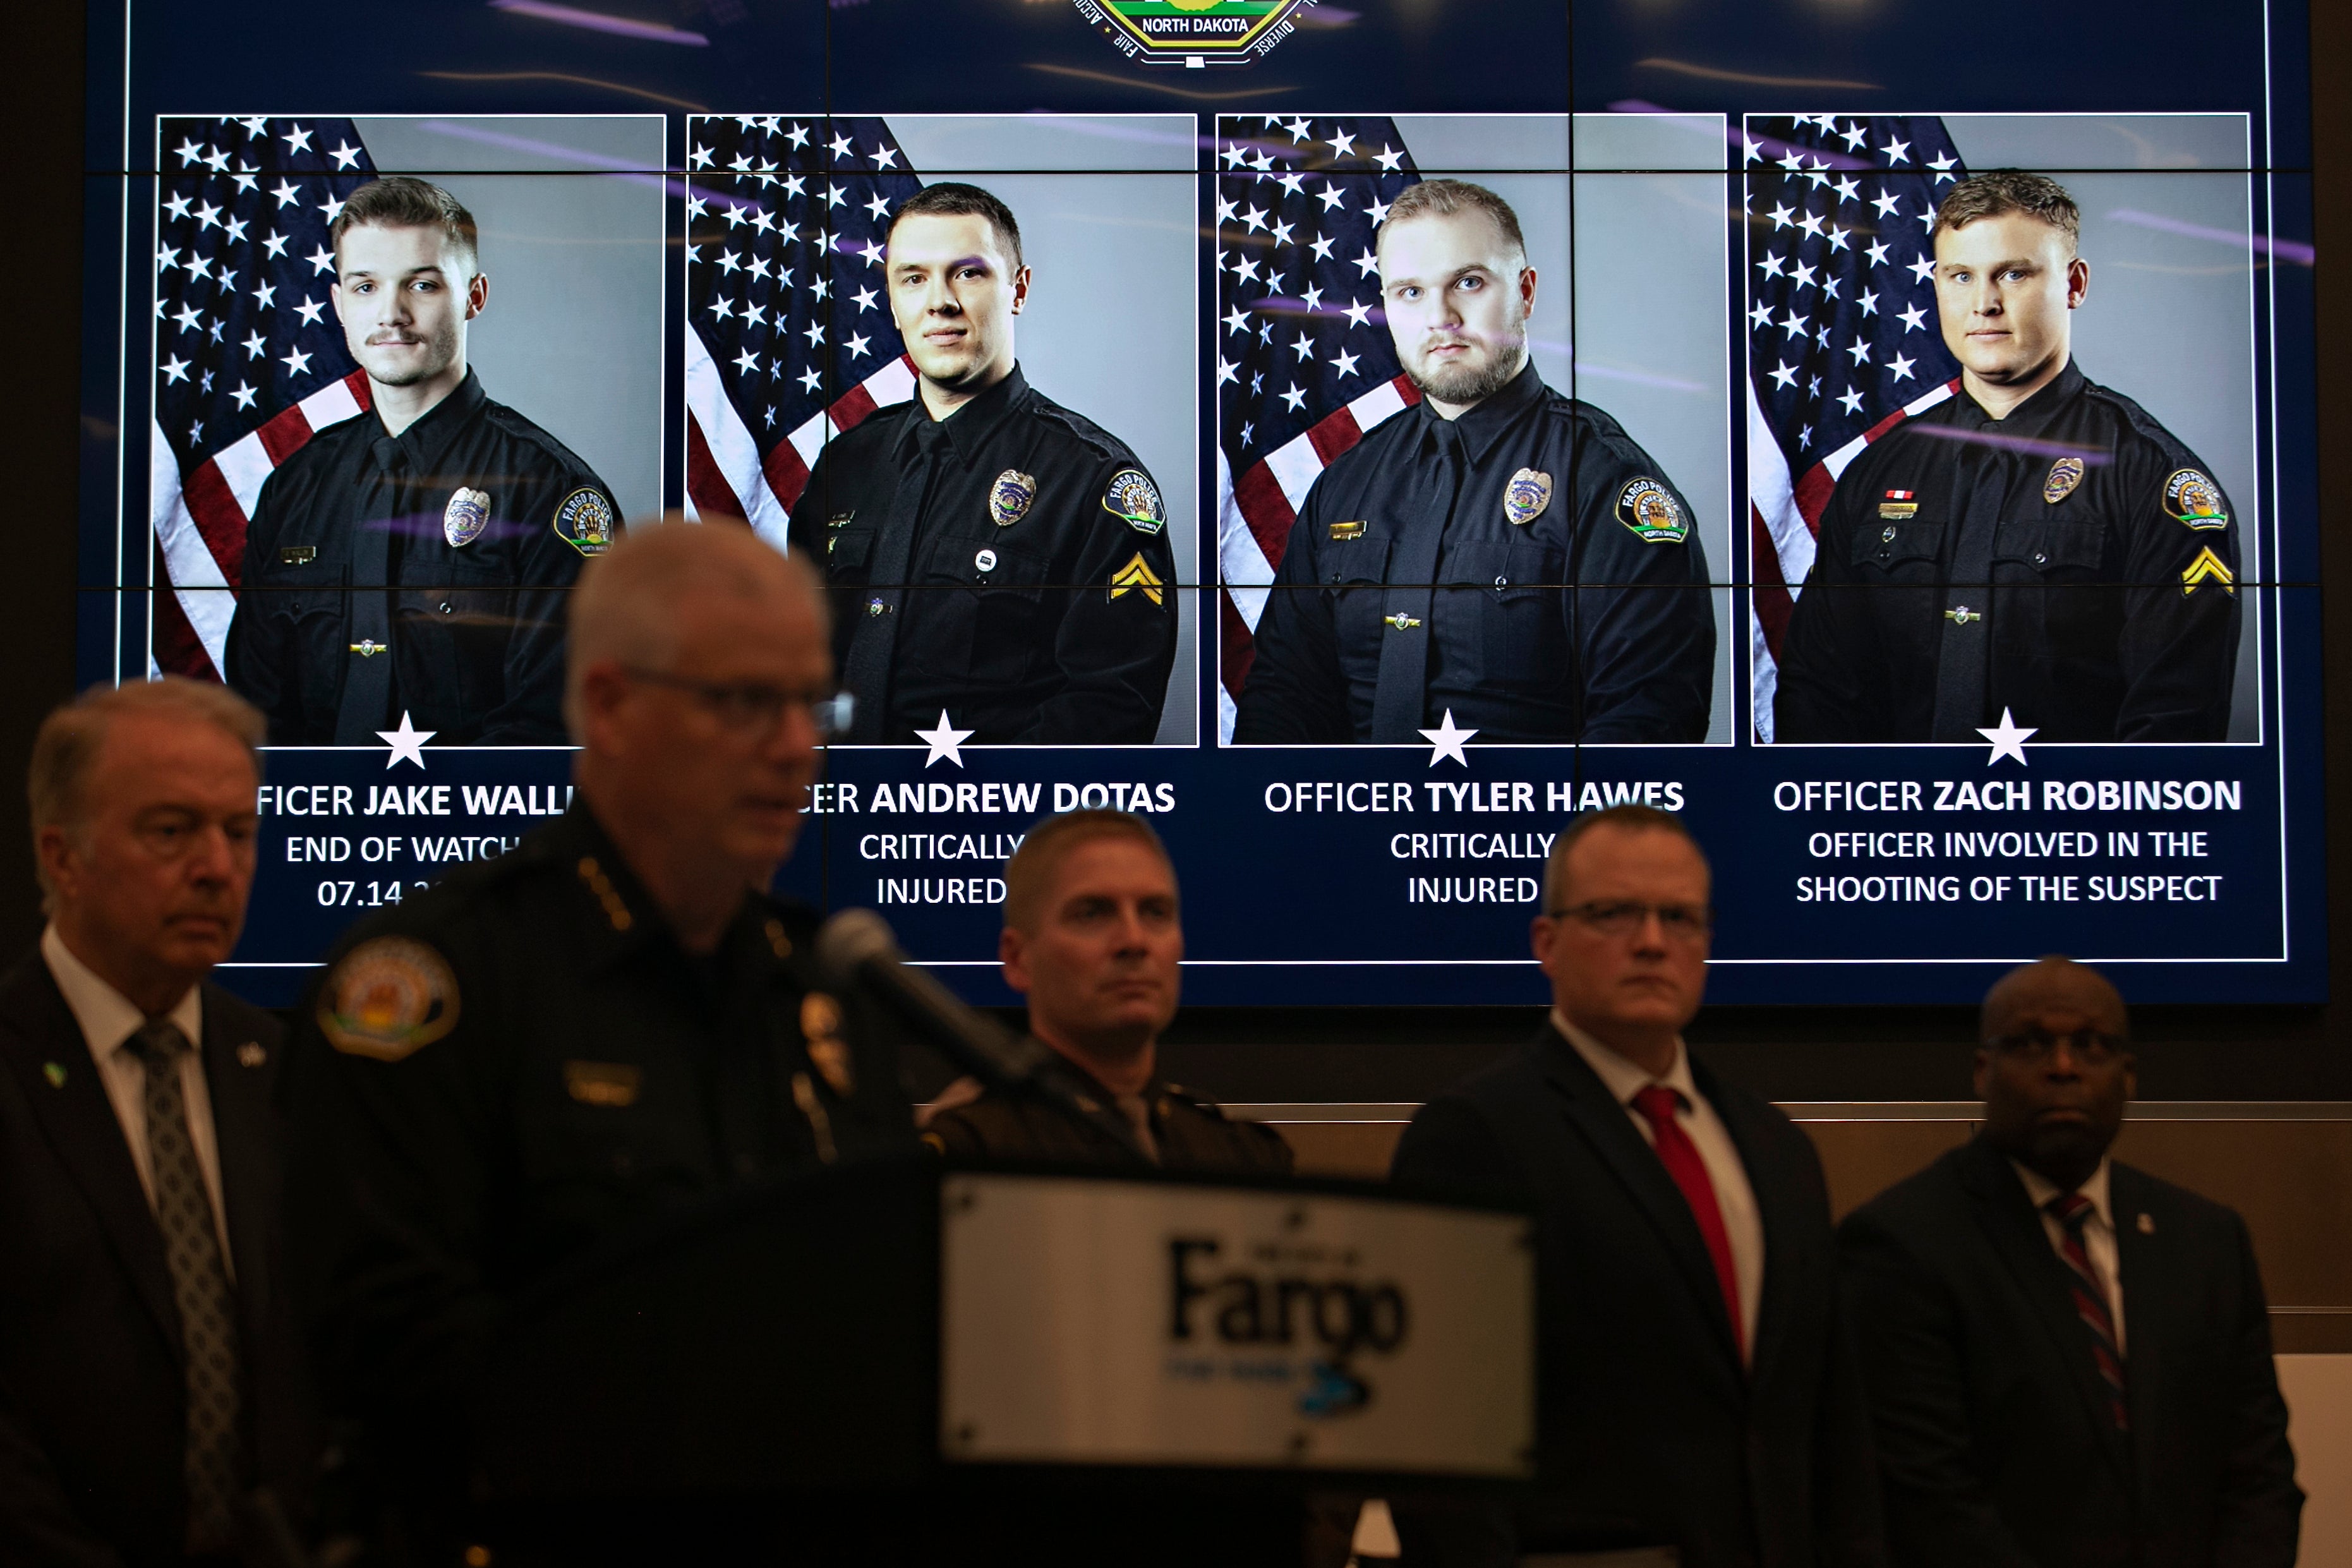 Photos of Fargo, N.D., police officers involved in a shooting are displayed during a news conference